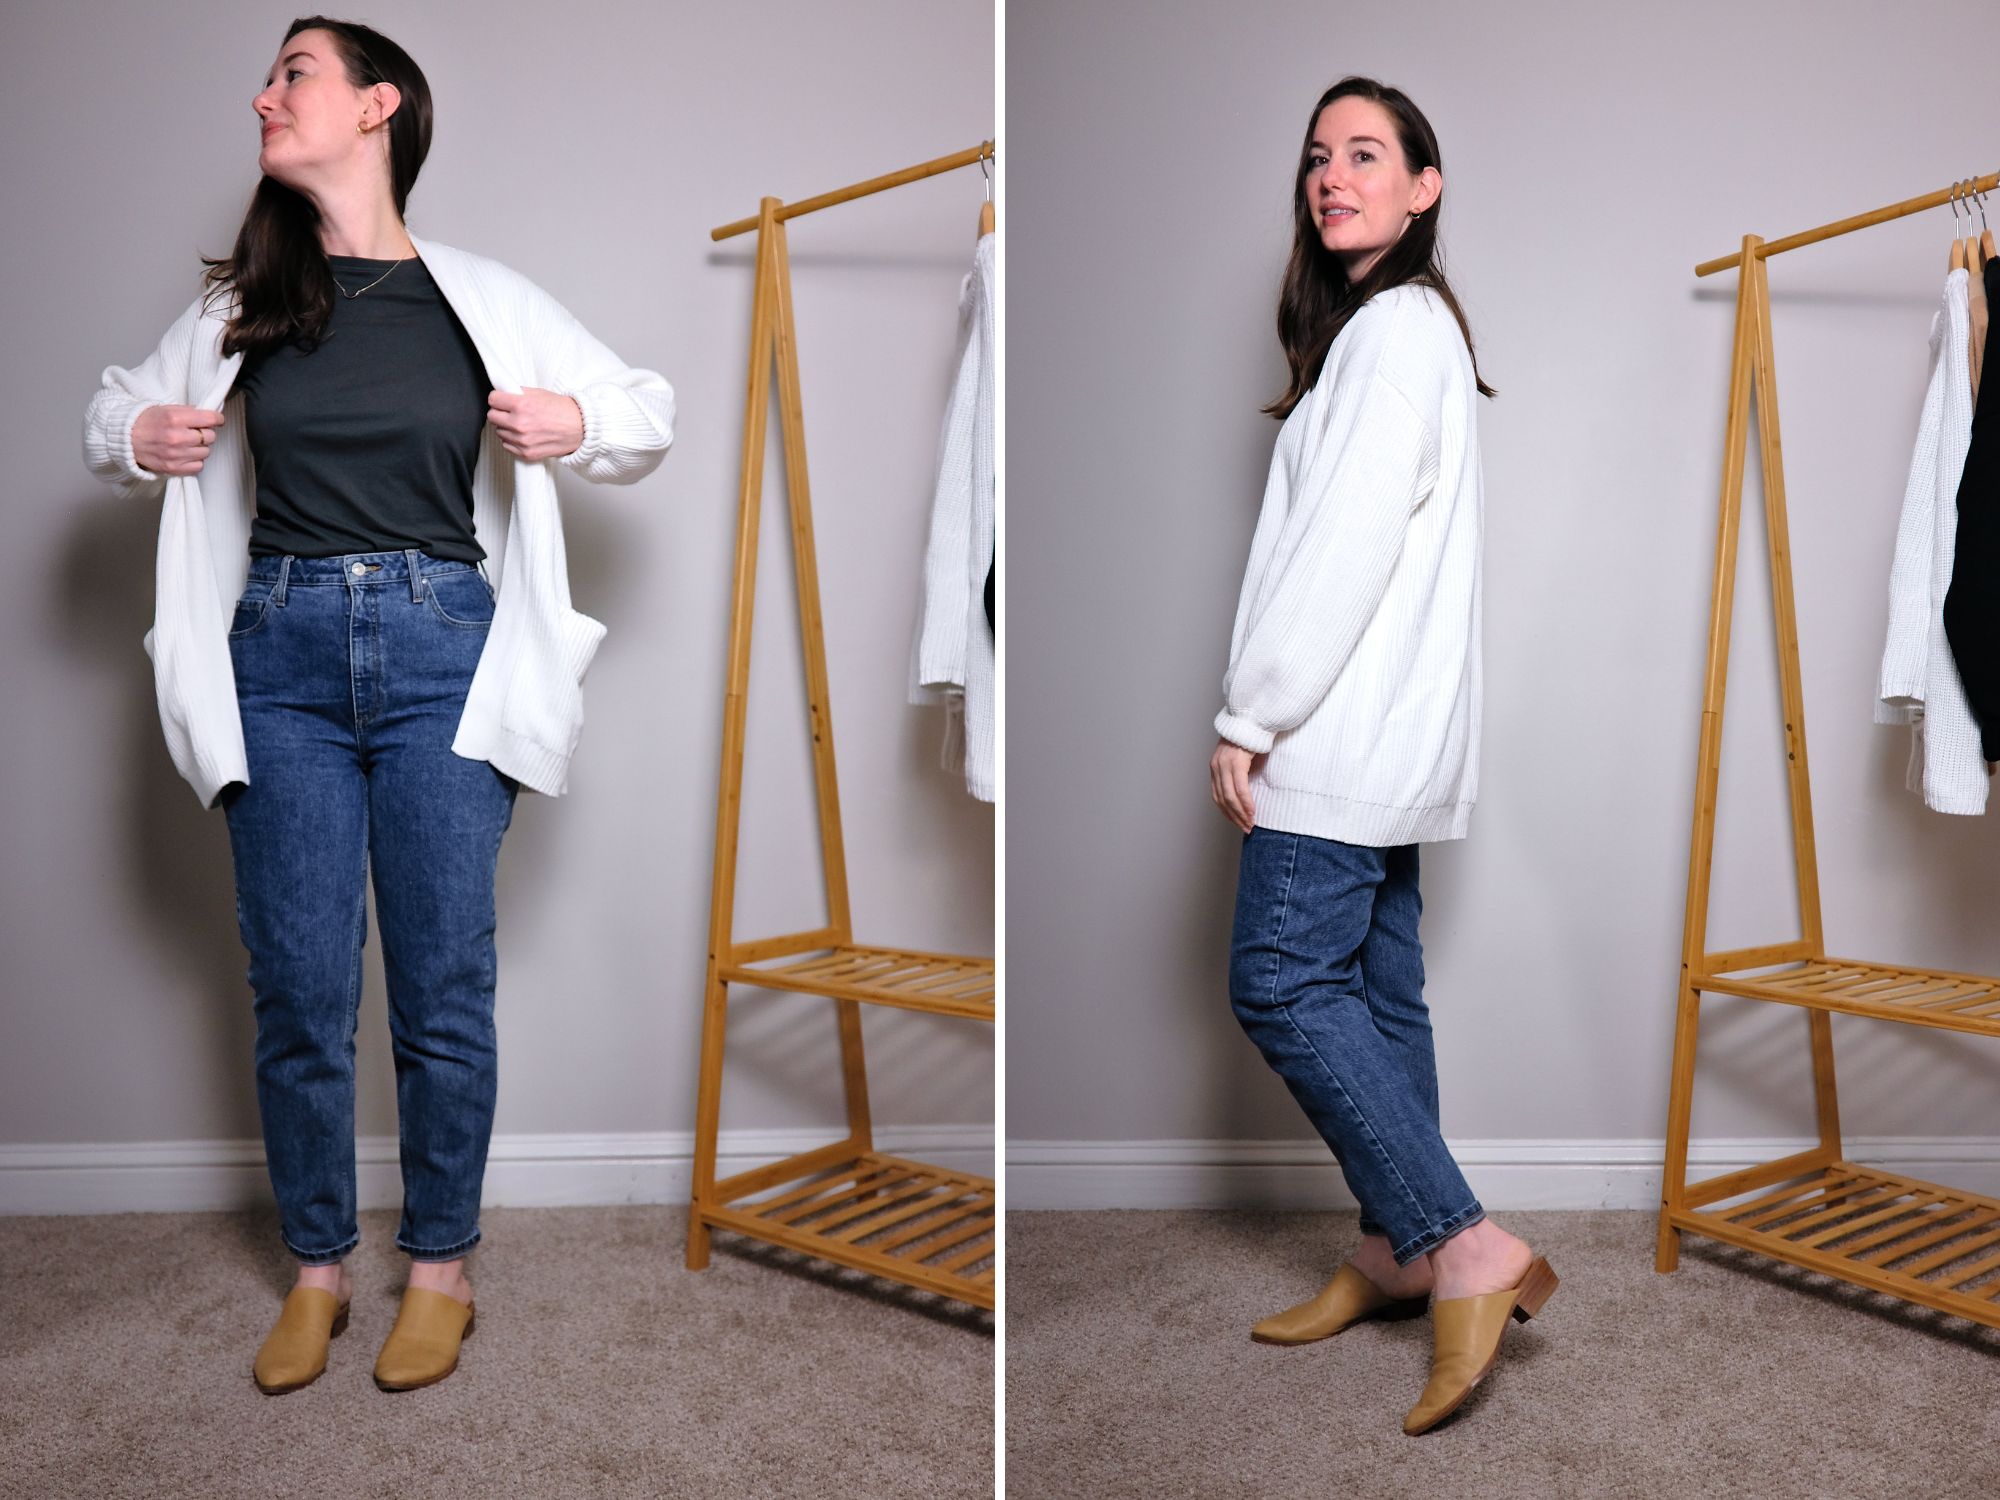 Alyssa wears the 100% Organic Cotton Oversized Cardigan from Quince; one photo she is facing the camera, and the other shows her turned to the side